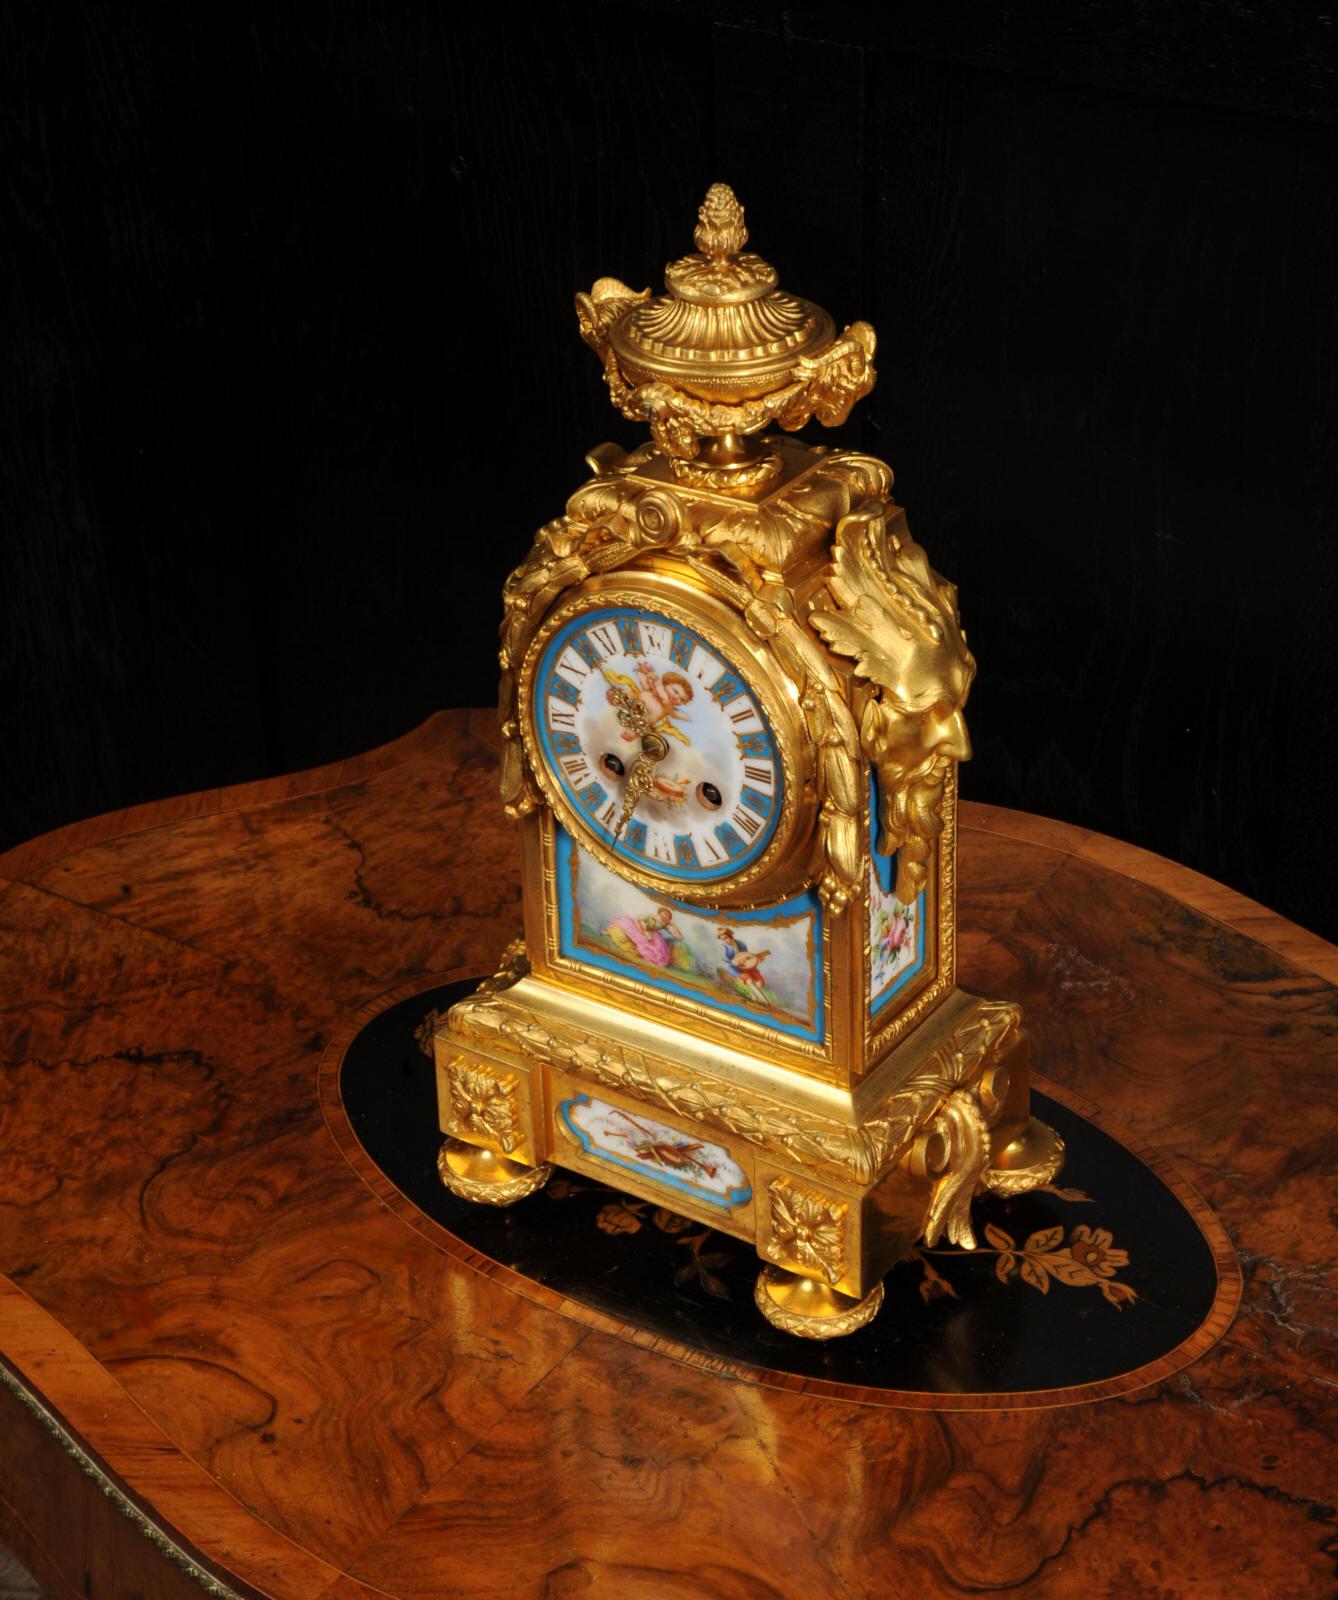 19th Century Early Ormolu and Sevres Porcelain Antique French Clock - Japy Fils Fully Working For Sale